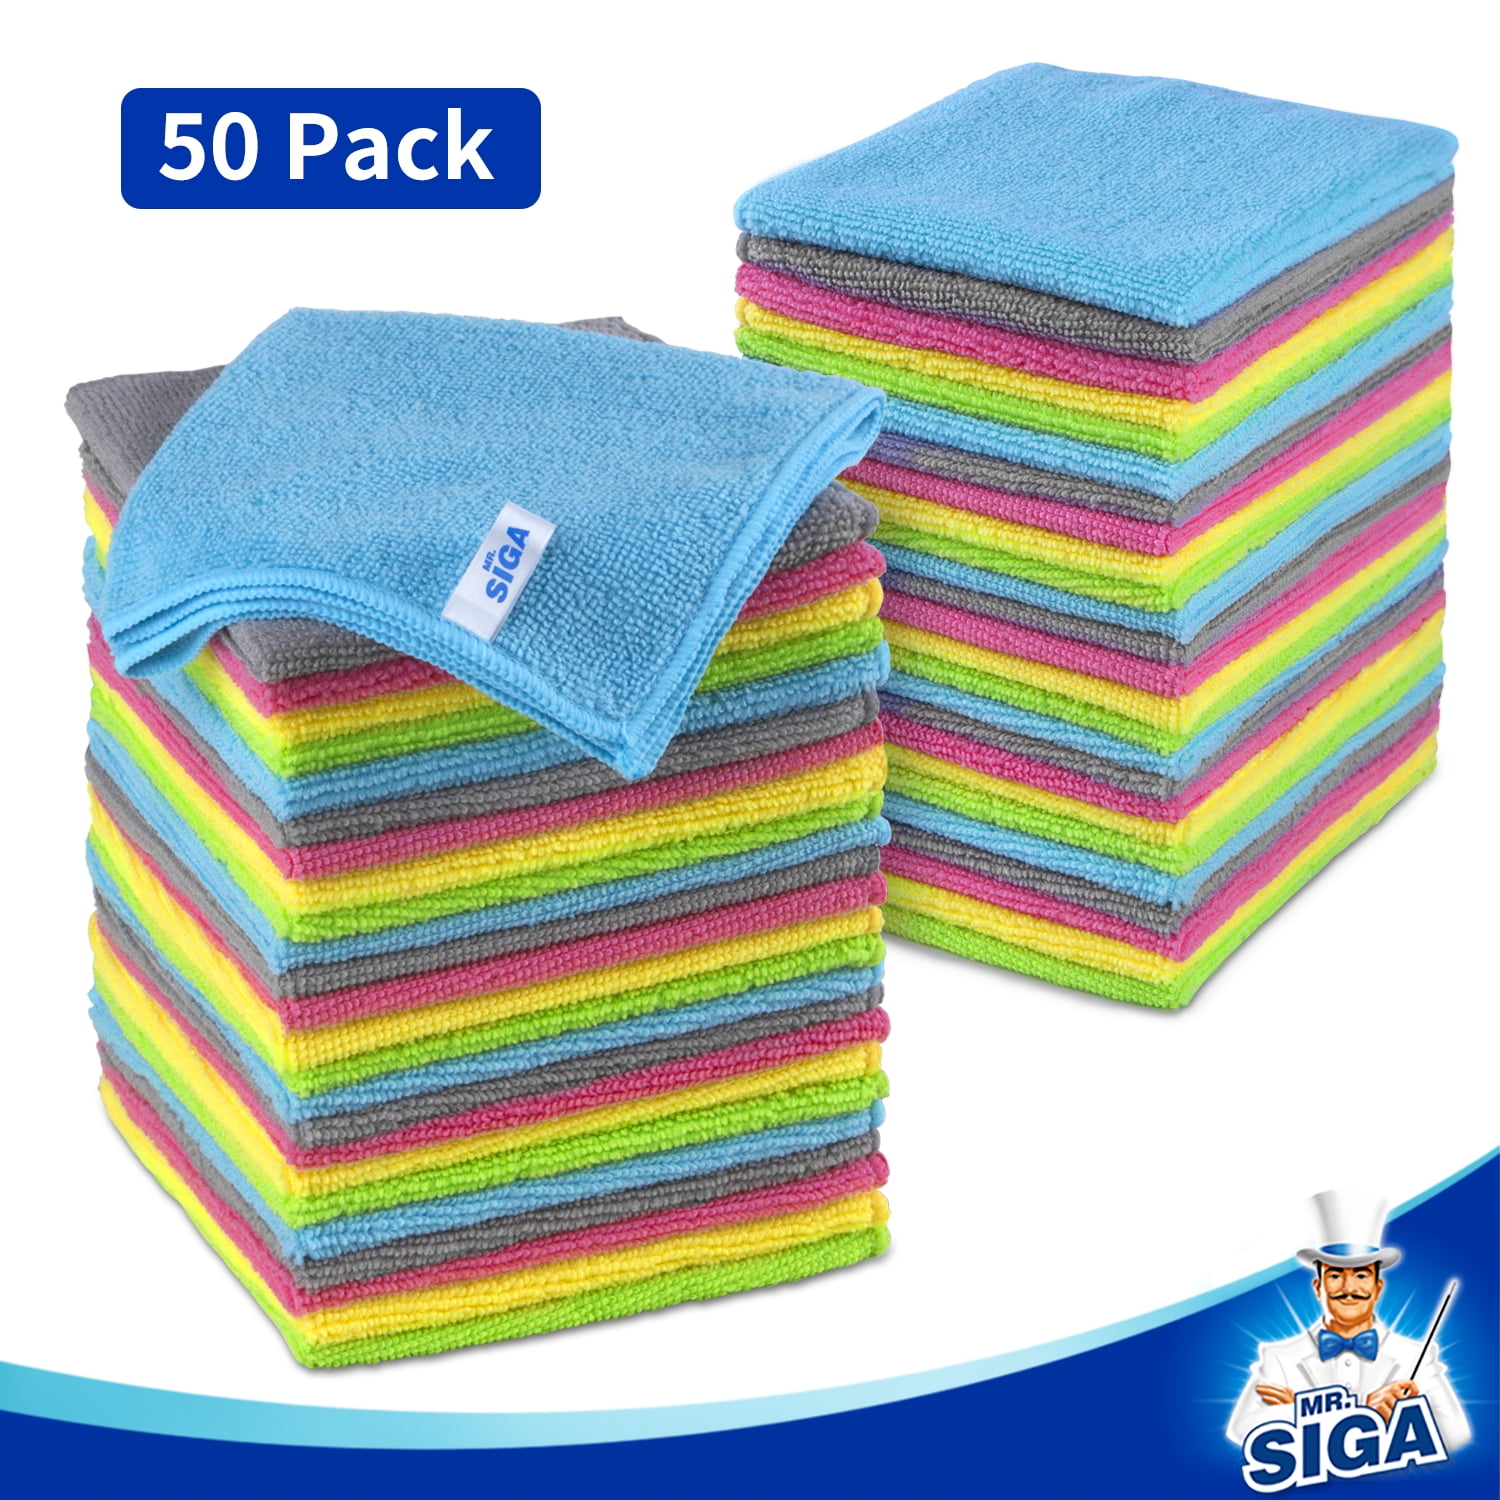 MR.SIGA Microfiber Cleaning Cloth, All-Purpose Microfiber Towels, Streak  Free Cleaning Rags, Pack of 12, White, Size 32 x 32 cm(12.6 x 12.6 inch)